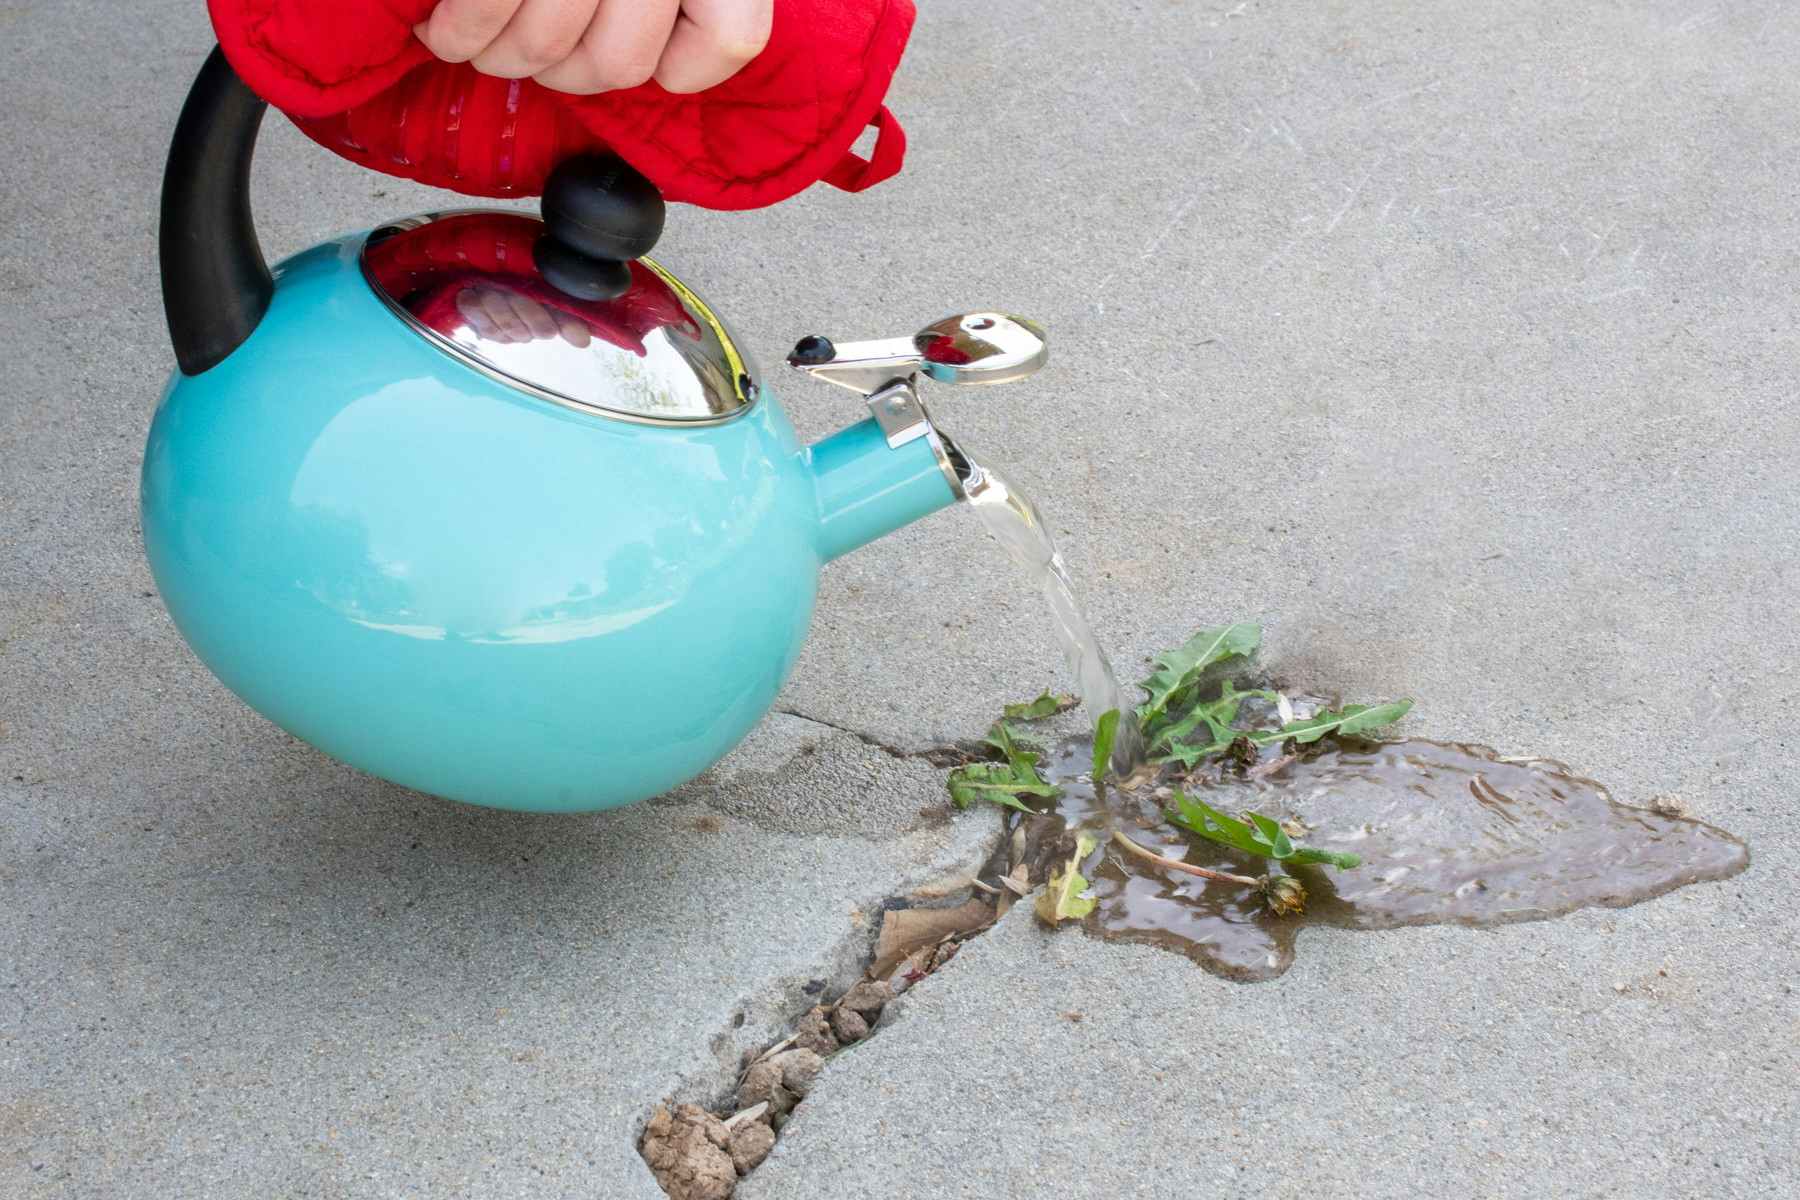 Scald your weeds with boiling water.